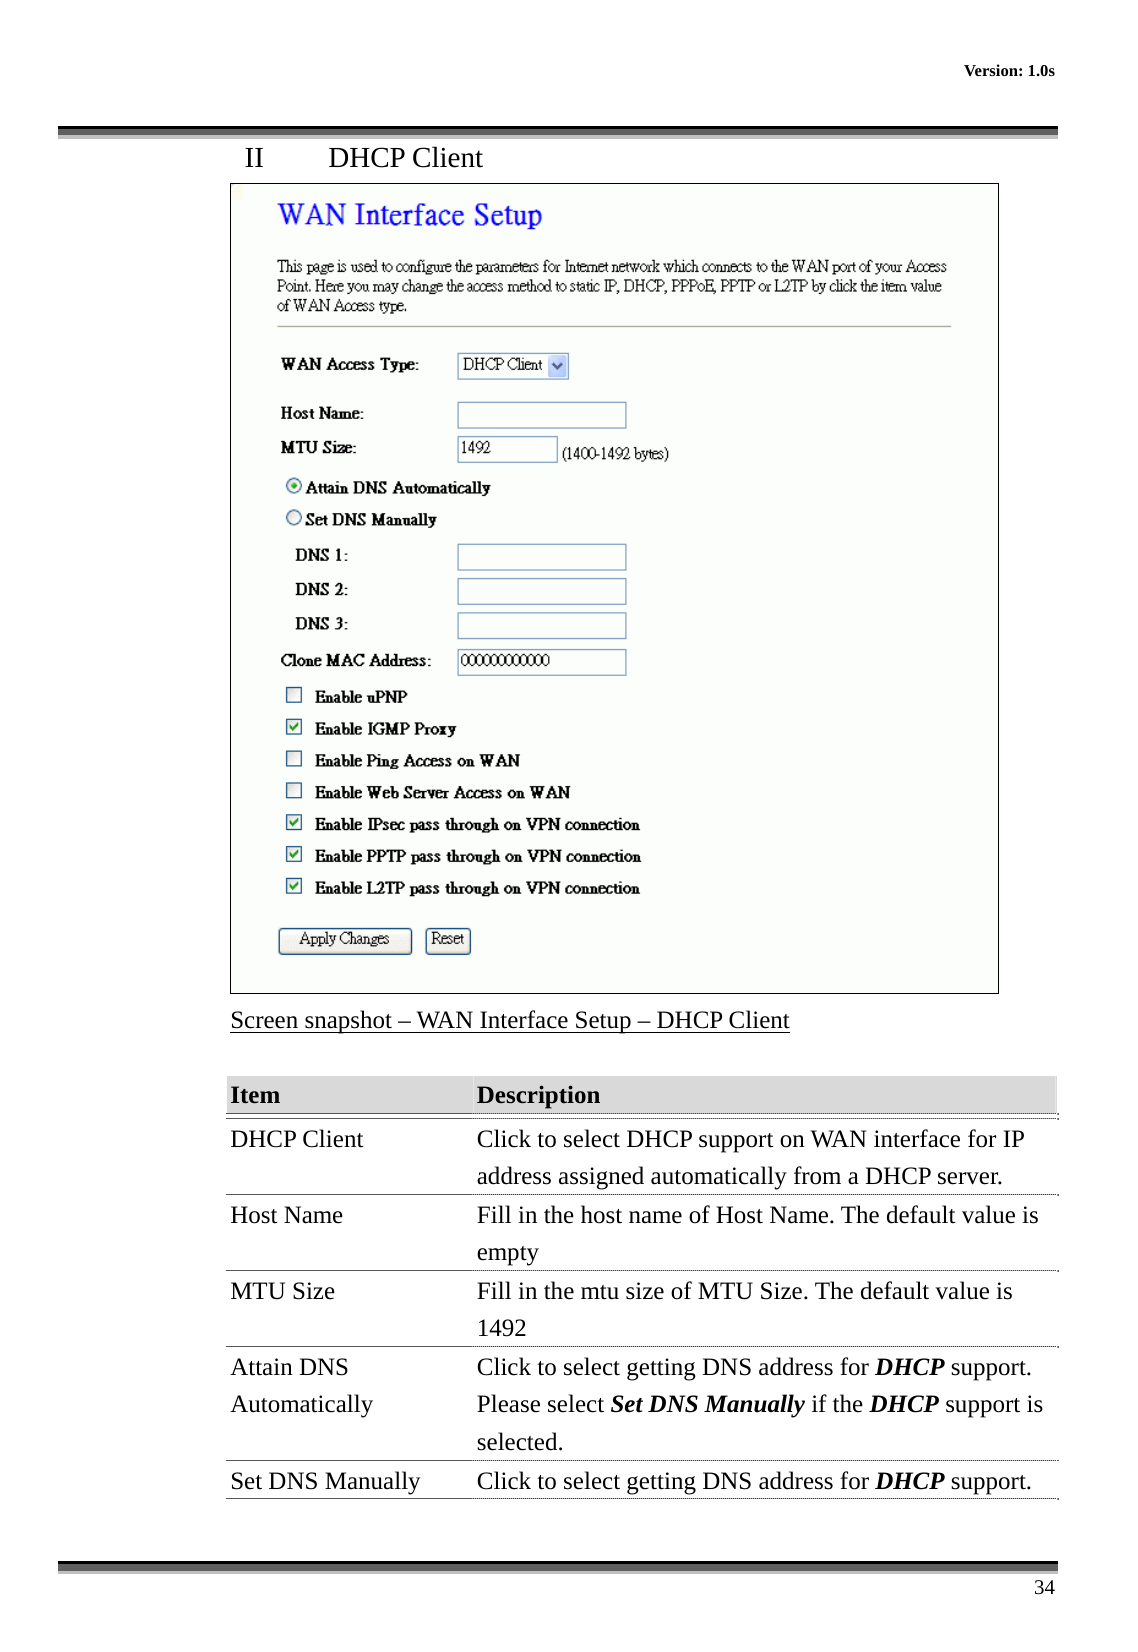    Version: 1.0s      34 II  DHCP Client  Screen snapshot – WAN Interface Setup – DHCP Client  Item  Description   DHCP Client  Click to select DHCP support on WAN interface for IP address assigned automatically from a DHCP server. Host Name  Fill in the host name of Host Name. The default value is empty MTU Size  Fill in the mtu size of MTU Size. The default value is 1492 Attain DNS Automatically Click to select getting DNS address for DHCP support. Please select Set DNS Manually if the DHCP support is selected. Set DNS Manually  Click to select getting DNS address for DHCP support. 